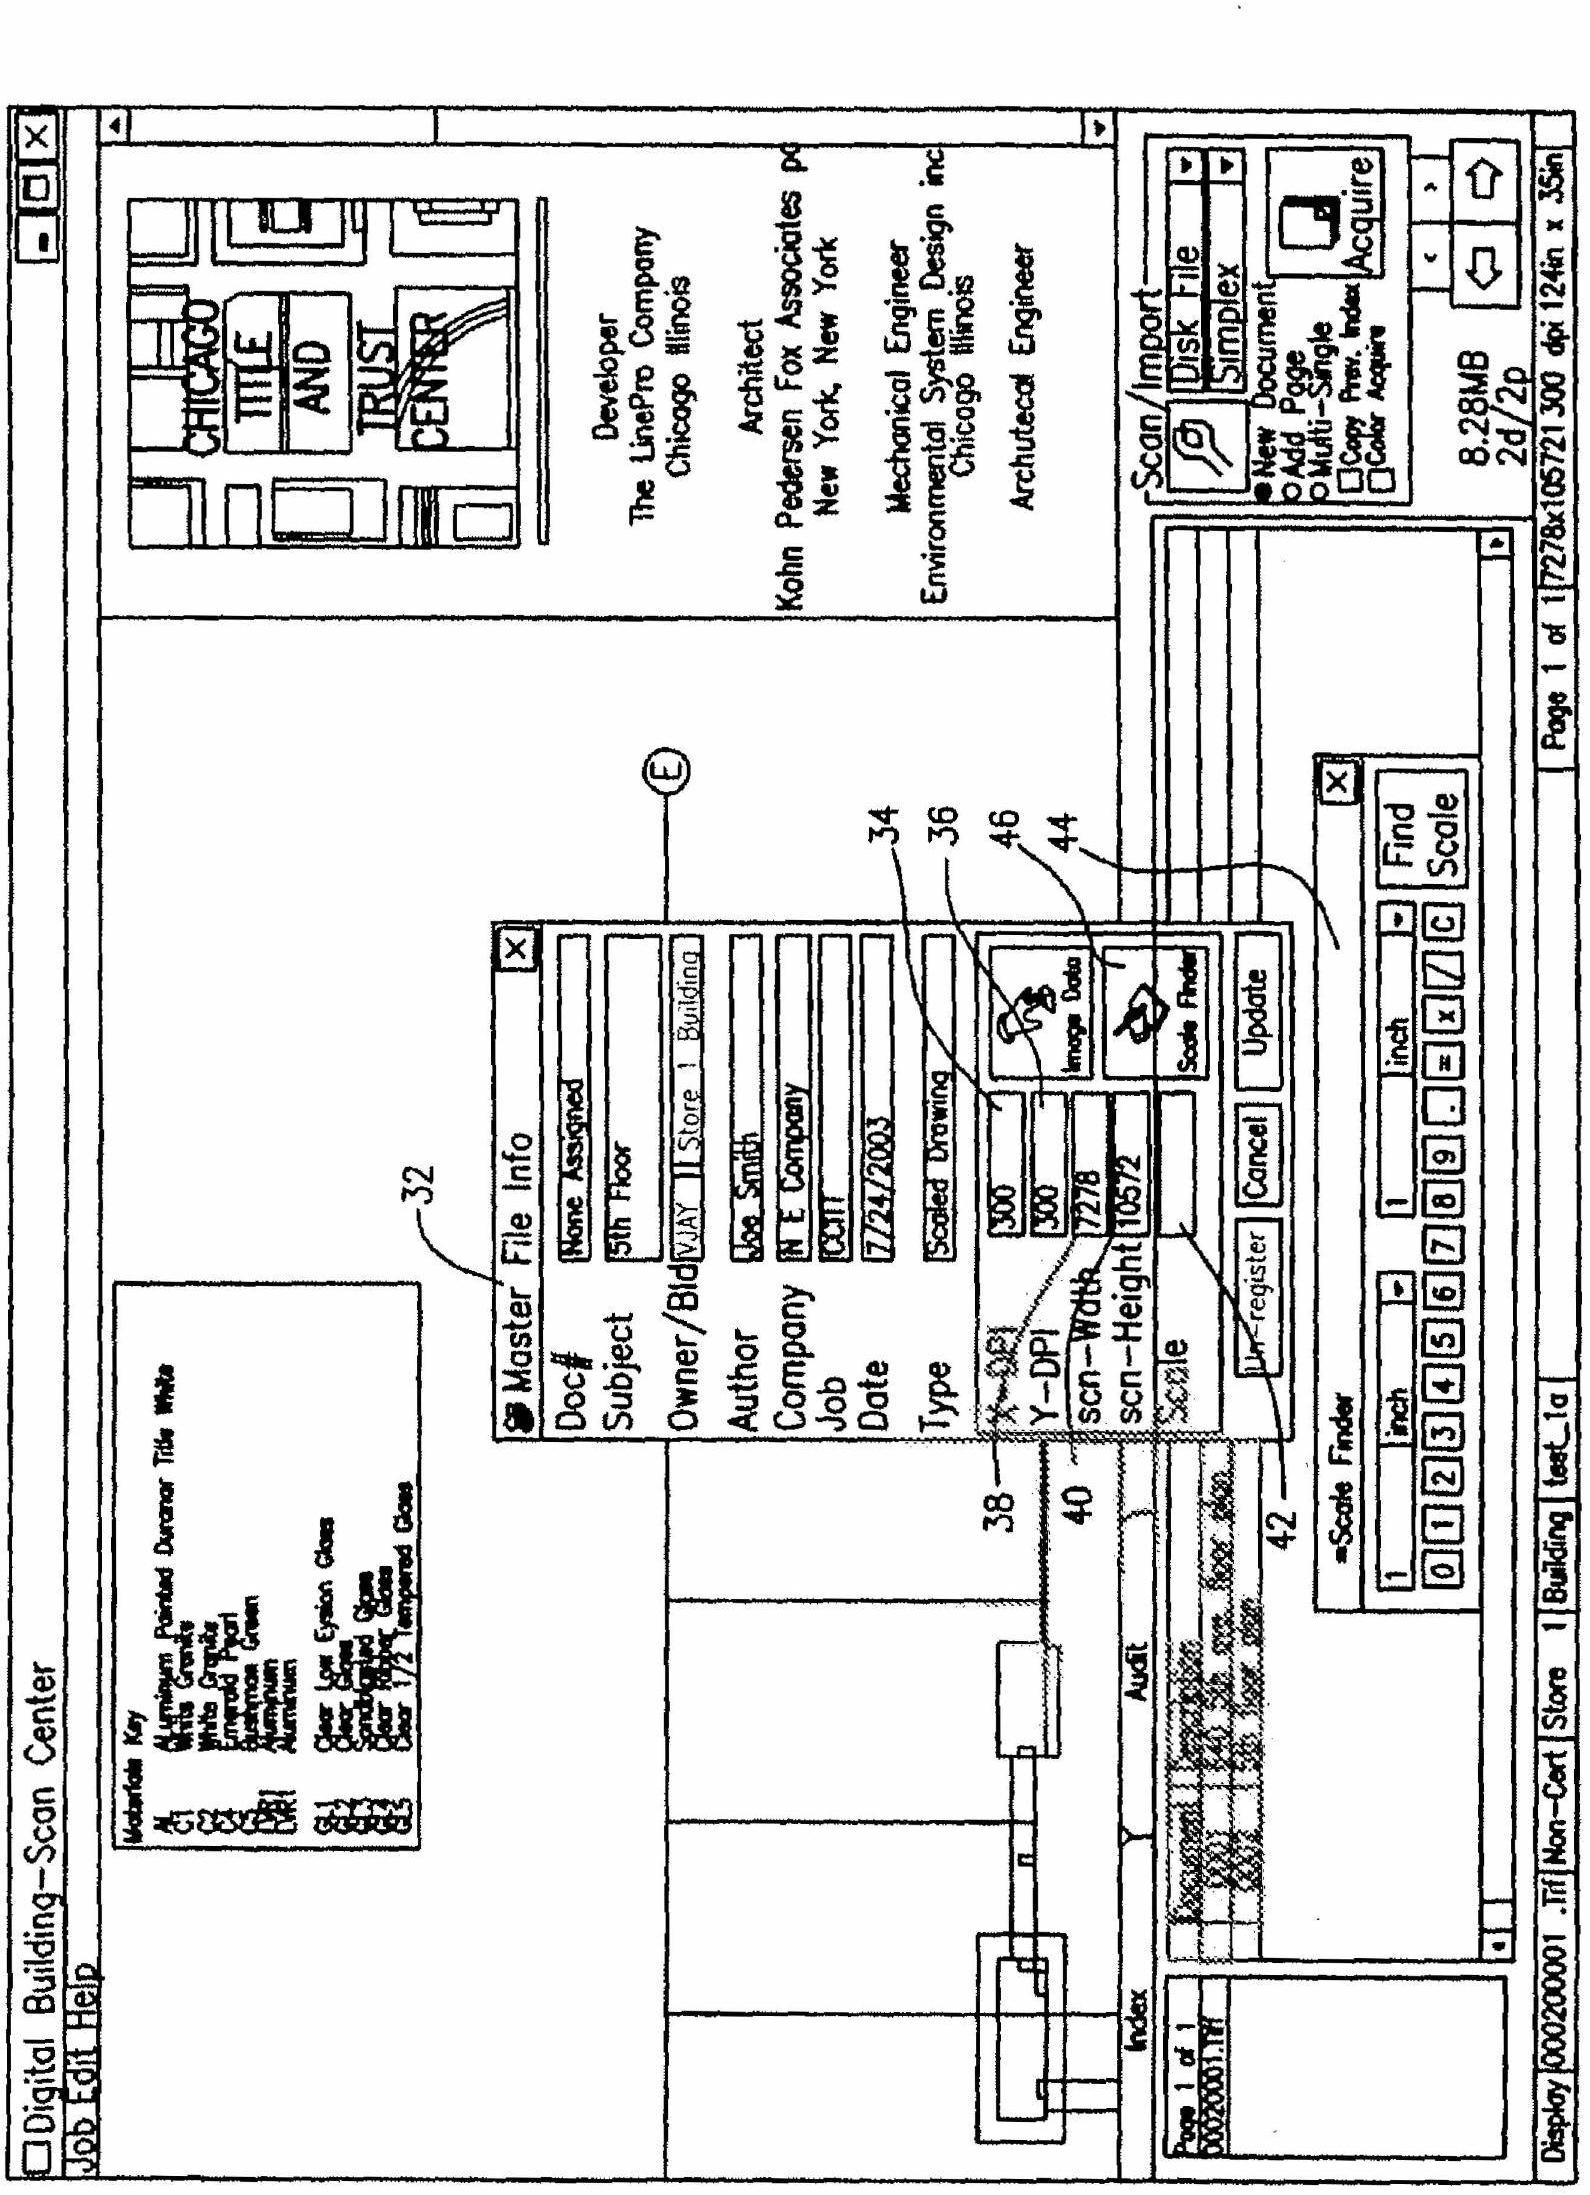 System and method employing three-dimensional and two-dimensional digital images